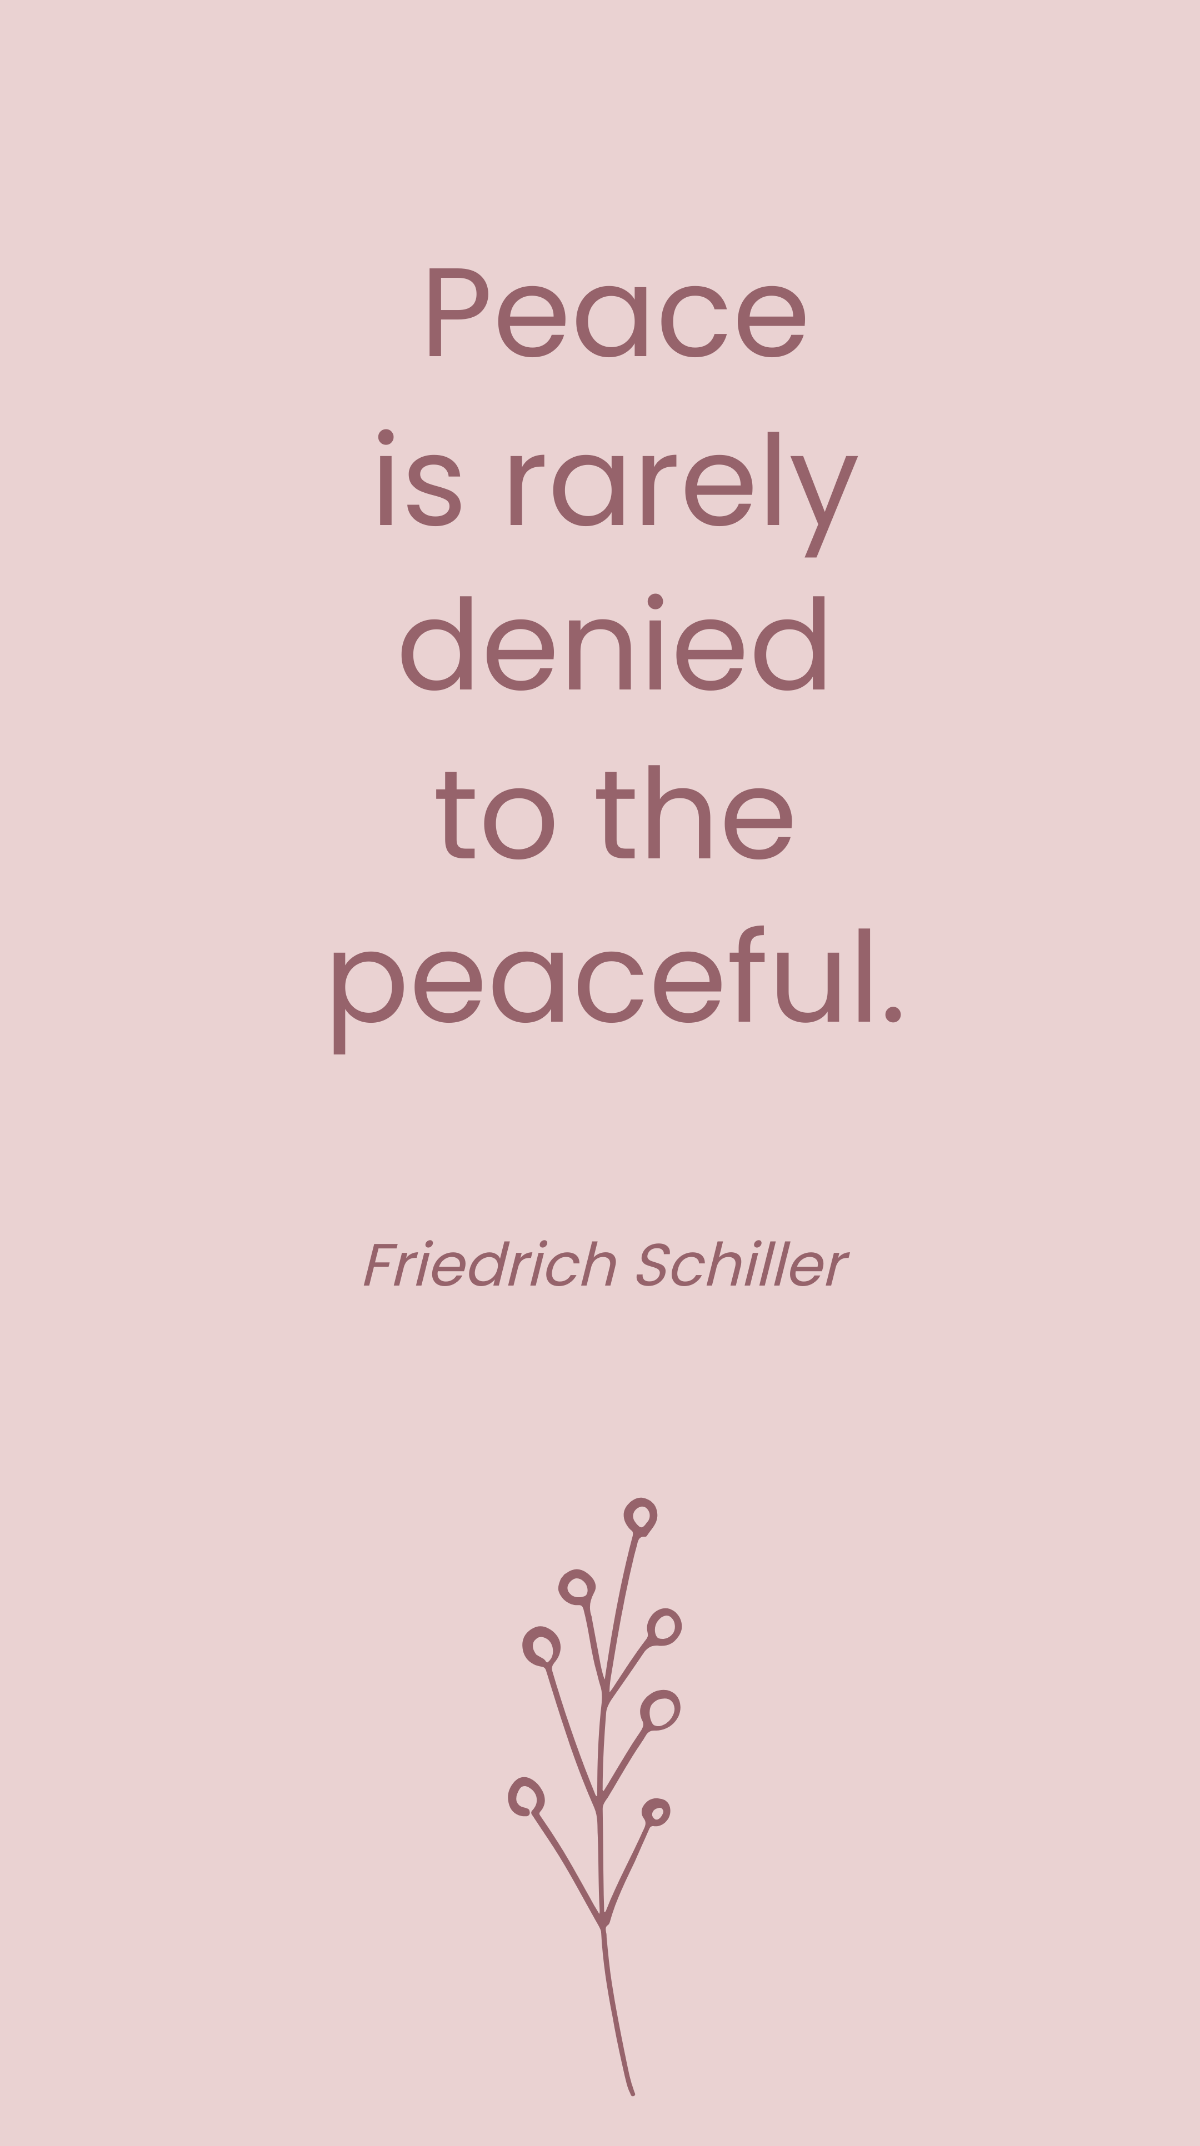 Friedrich Schiller - Peace is rarely denied to the peaceful. Template